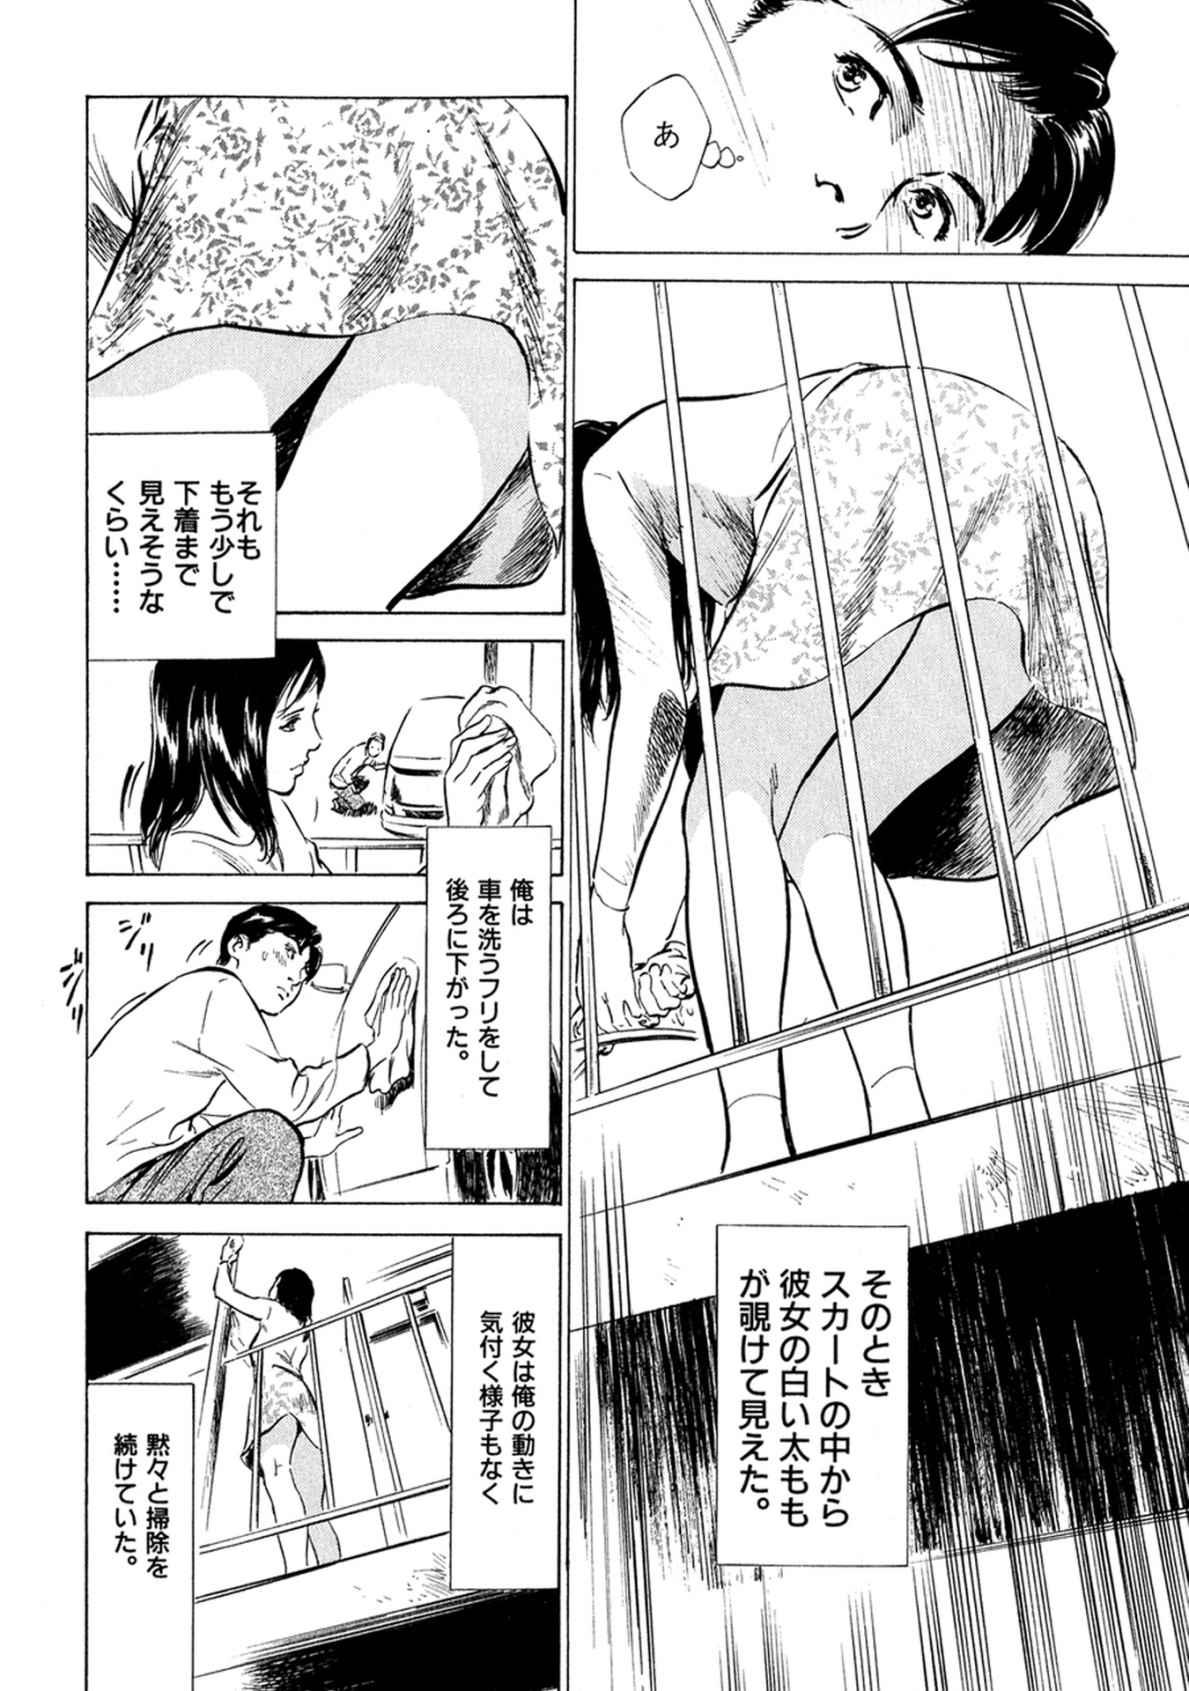 College 八月薫全集 第1巻 不倫は服を着て歩く Monster Dick - Page 6